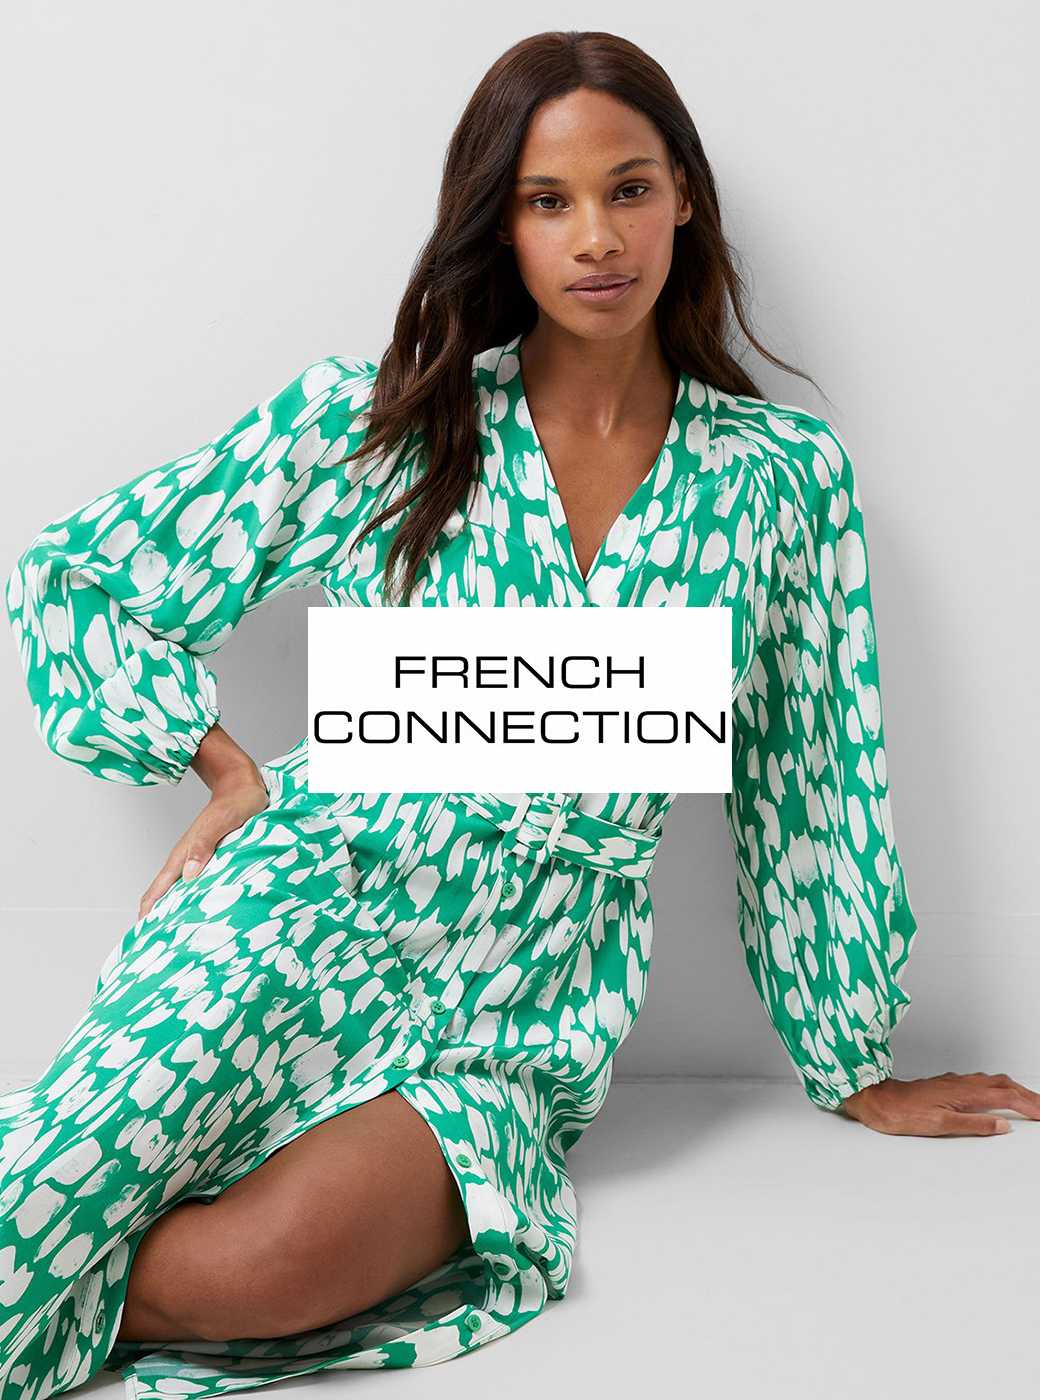 Shop French Connection.